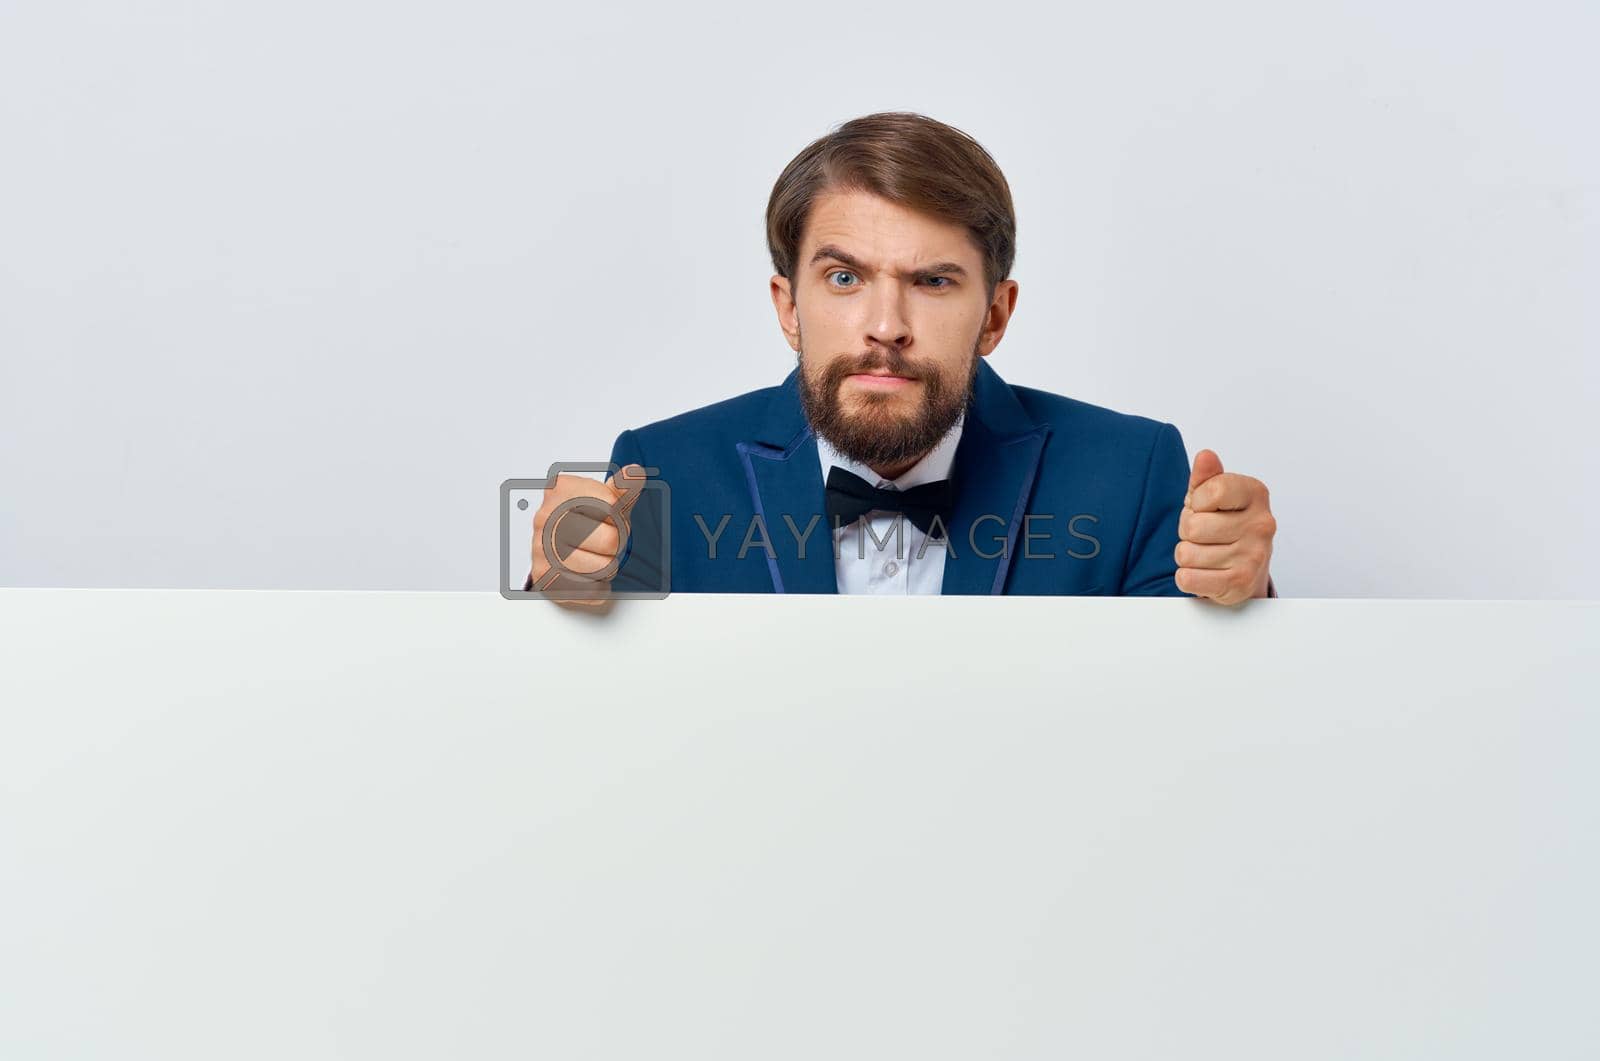 Royalty free image of business man emotion presentation white mocap poster advertising executive by SHOTPRIME